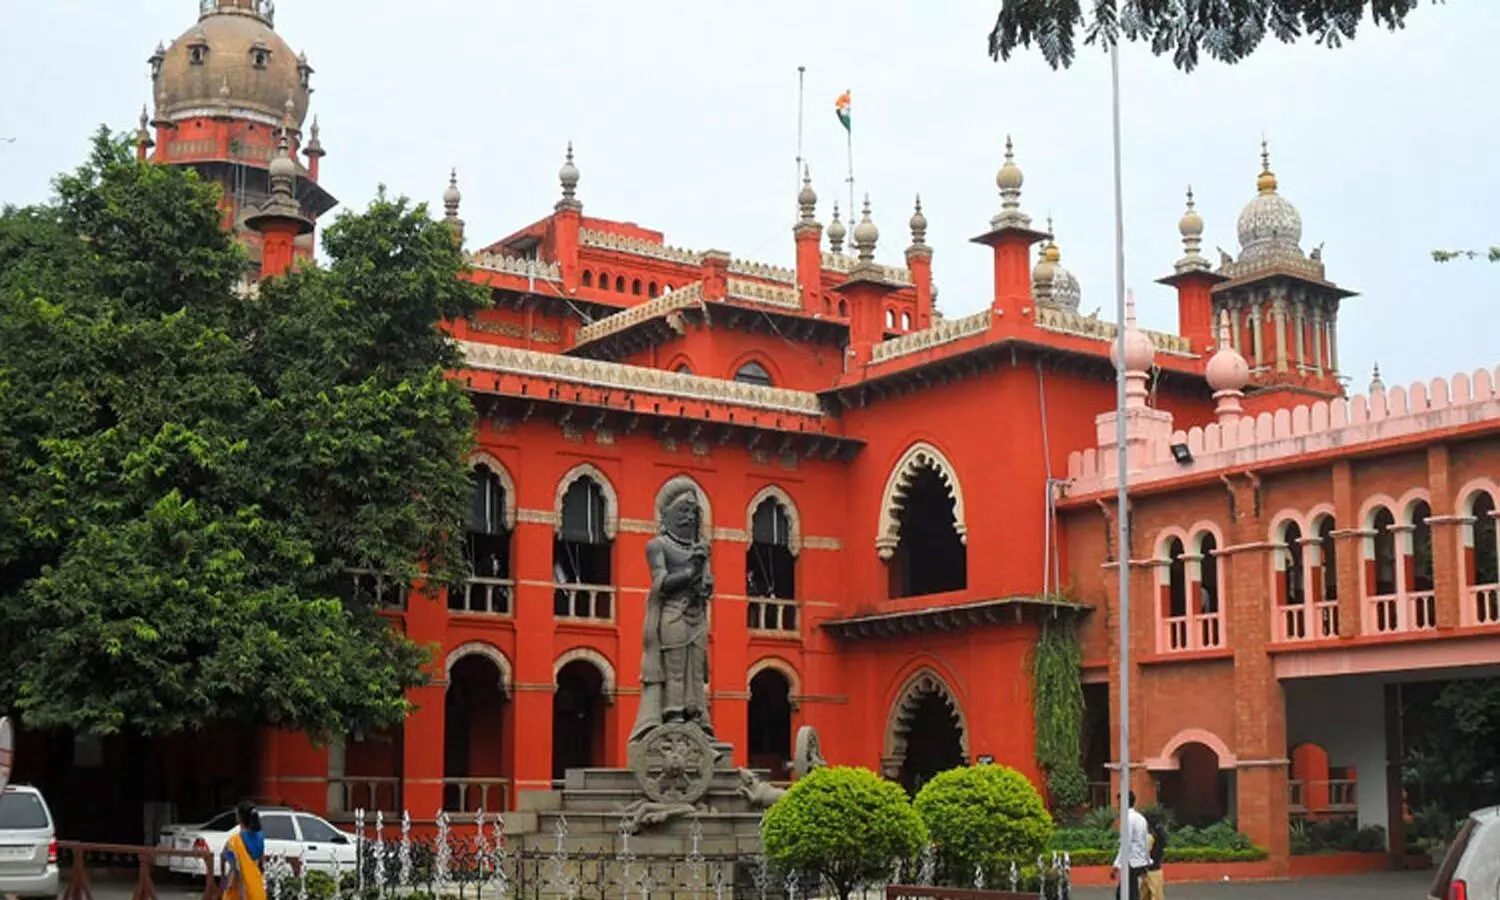 7.5 percent Govt school quota for MBBS admissions challenged: Madras HC seeks response from Govt